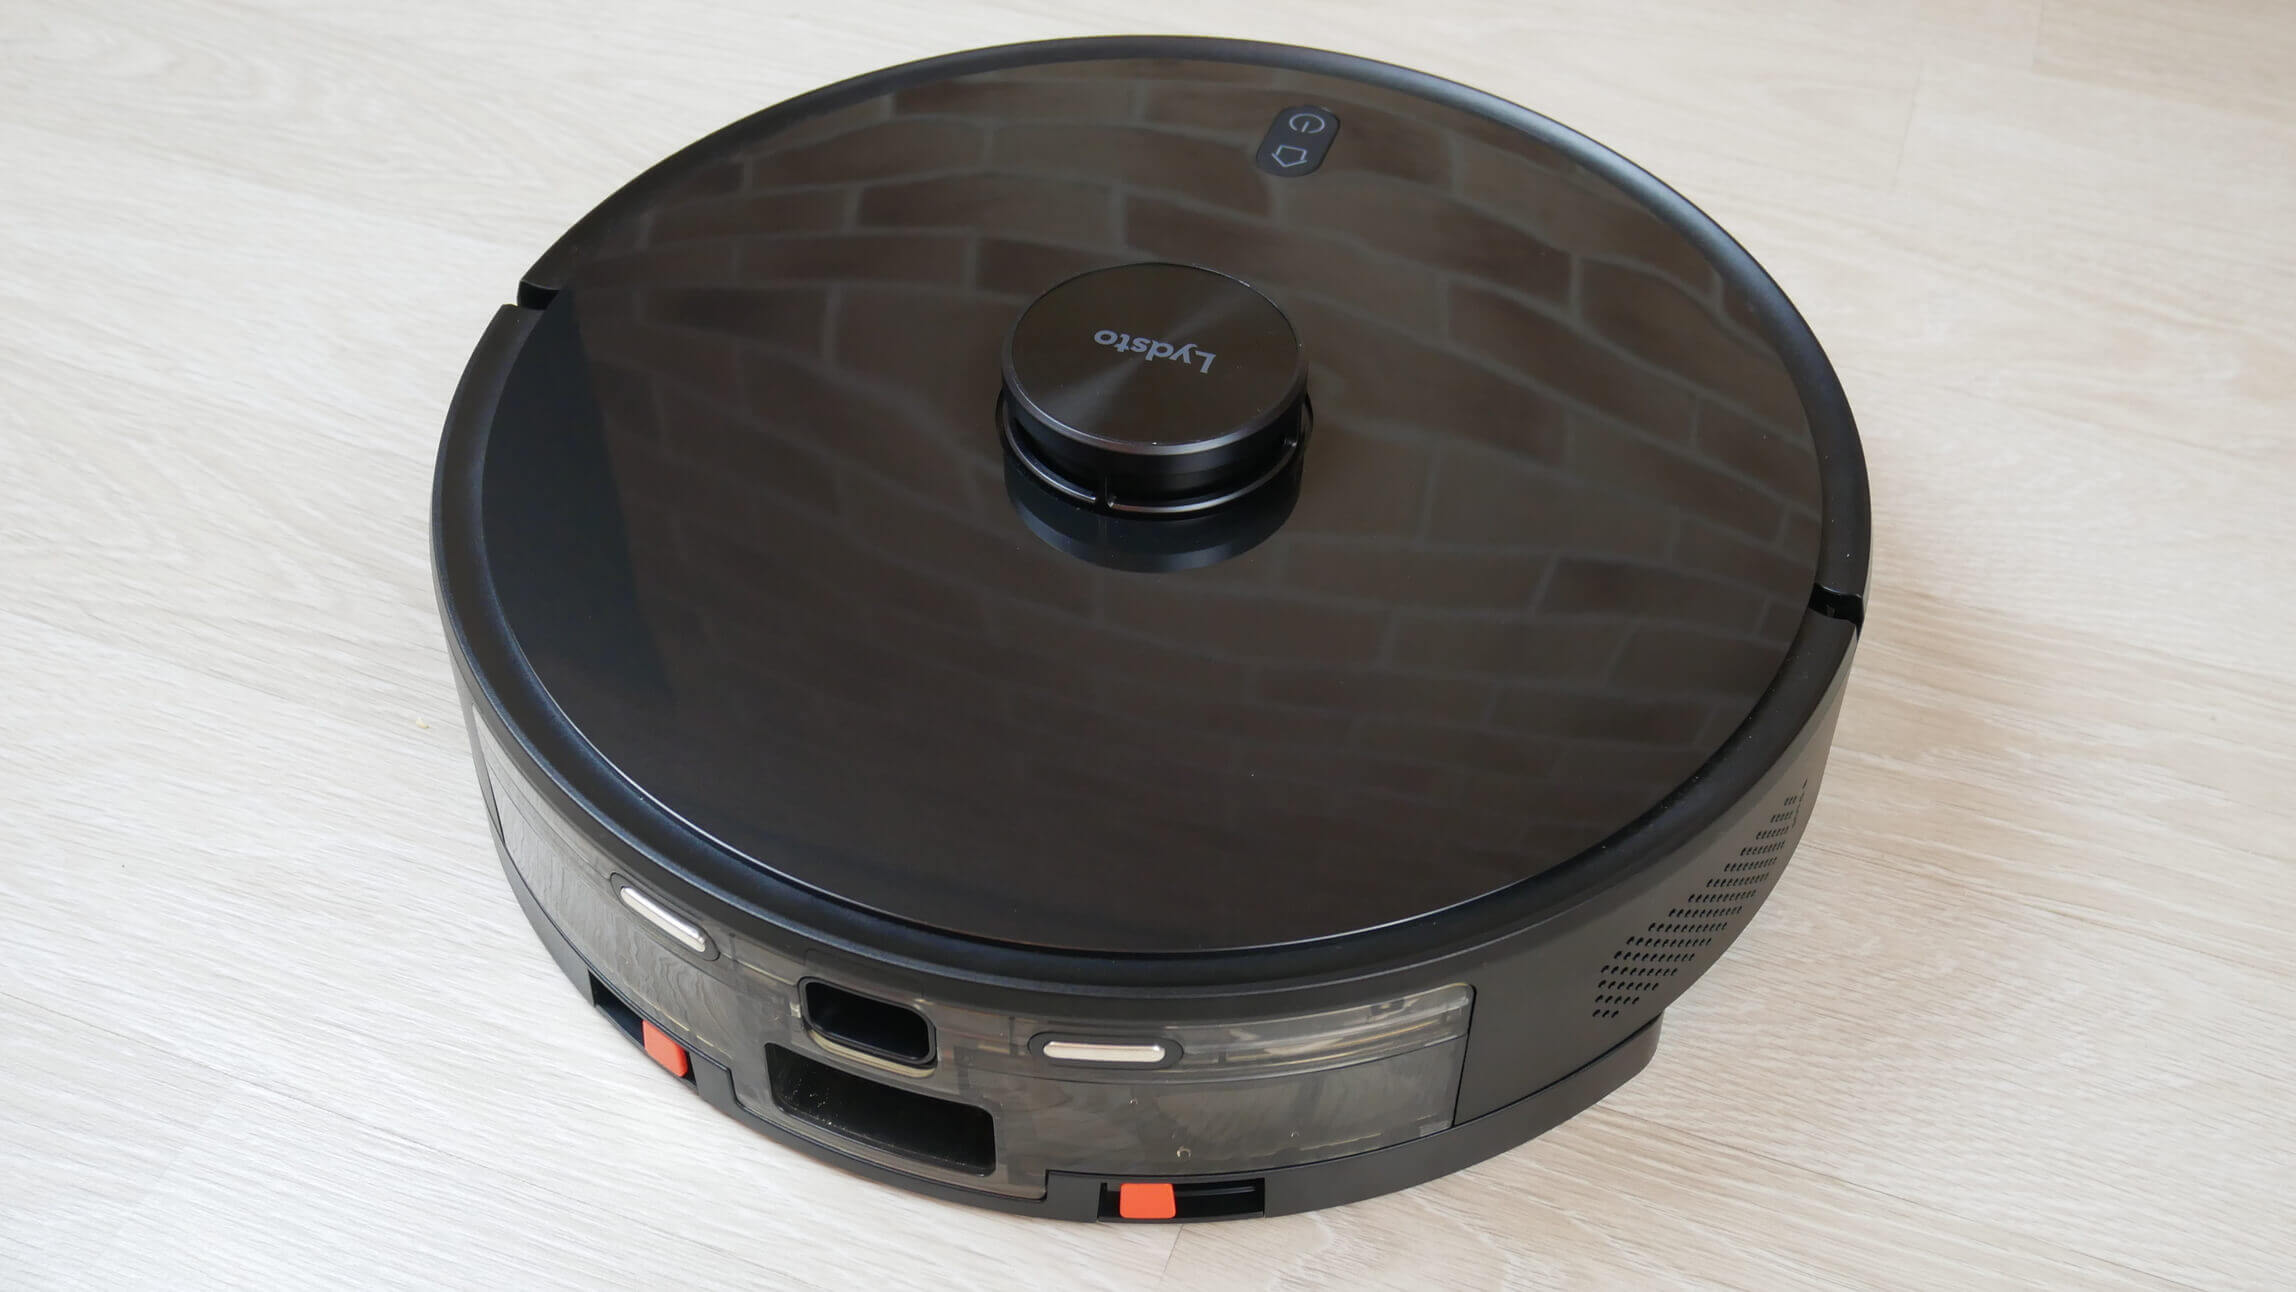 Xiaomi lydsto robot vacuum cleaner. Lydsto r1 робот-пылесос. Робот-пылесос Xiaomi lydsto r1. Робот-пылесос lydsto r1 Robot Vacuum Cleaner. Робот пылесос Xiaomi lydsto r1 Robot Vacuum cleane.